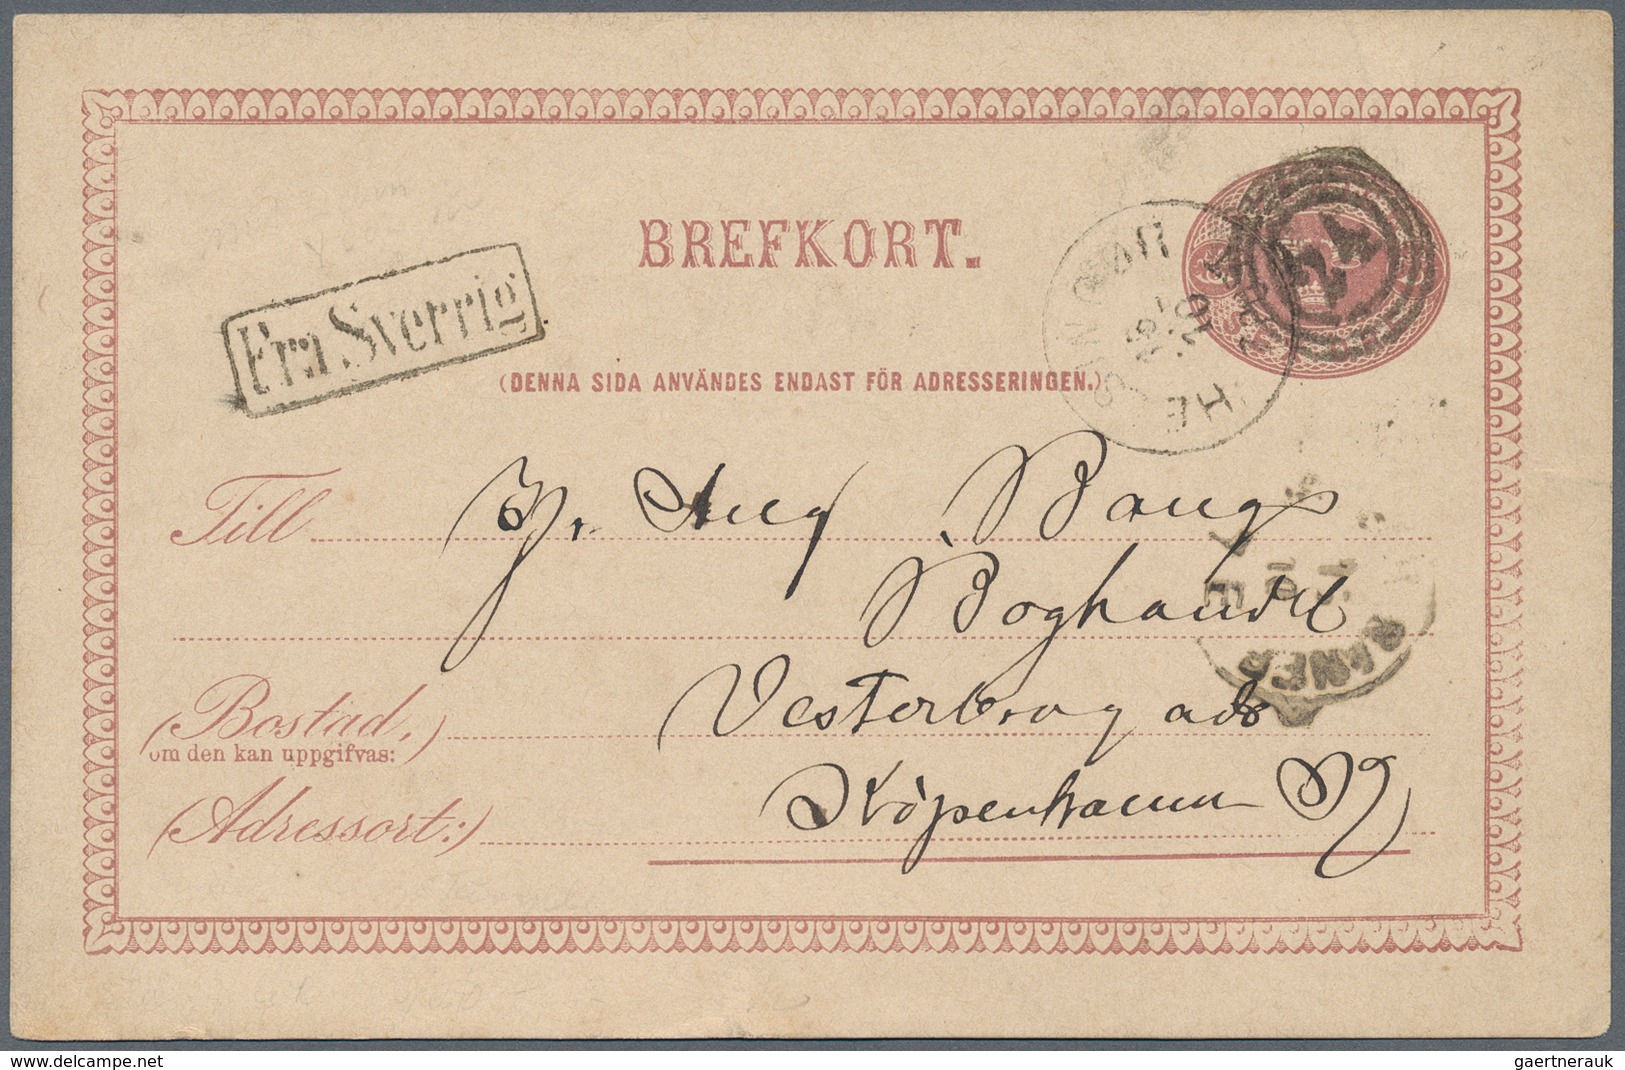 Schweden - Stempel: 1845/1957, Collection of about 36 letters/cards, nearly all with ship-post cance